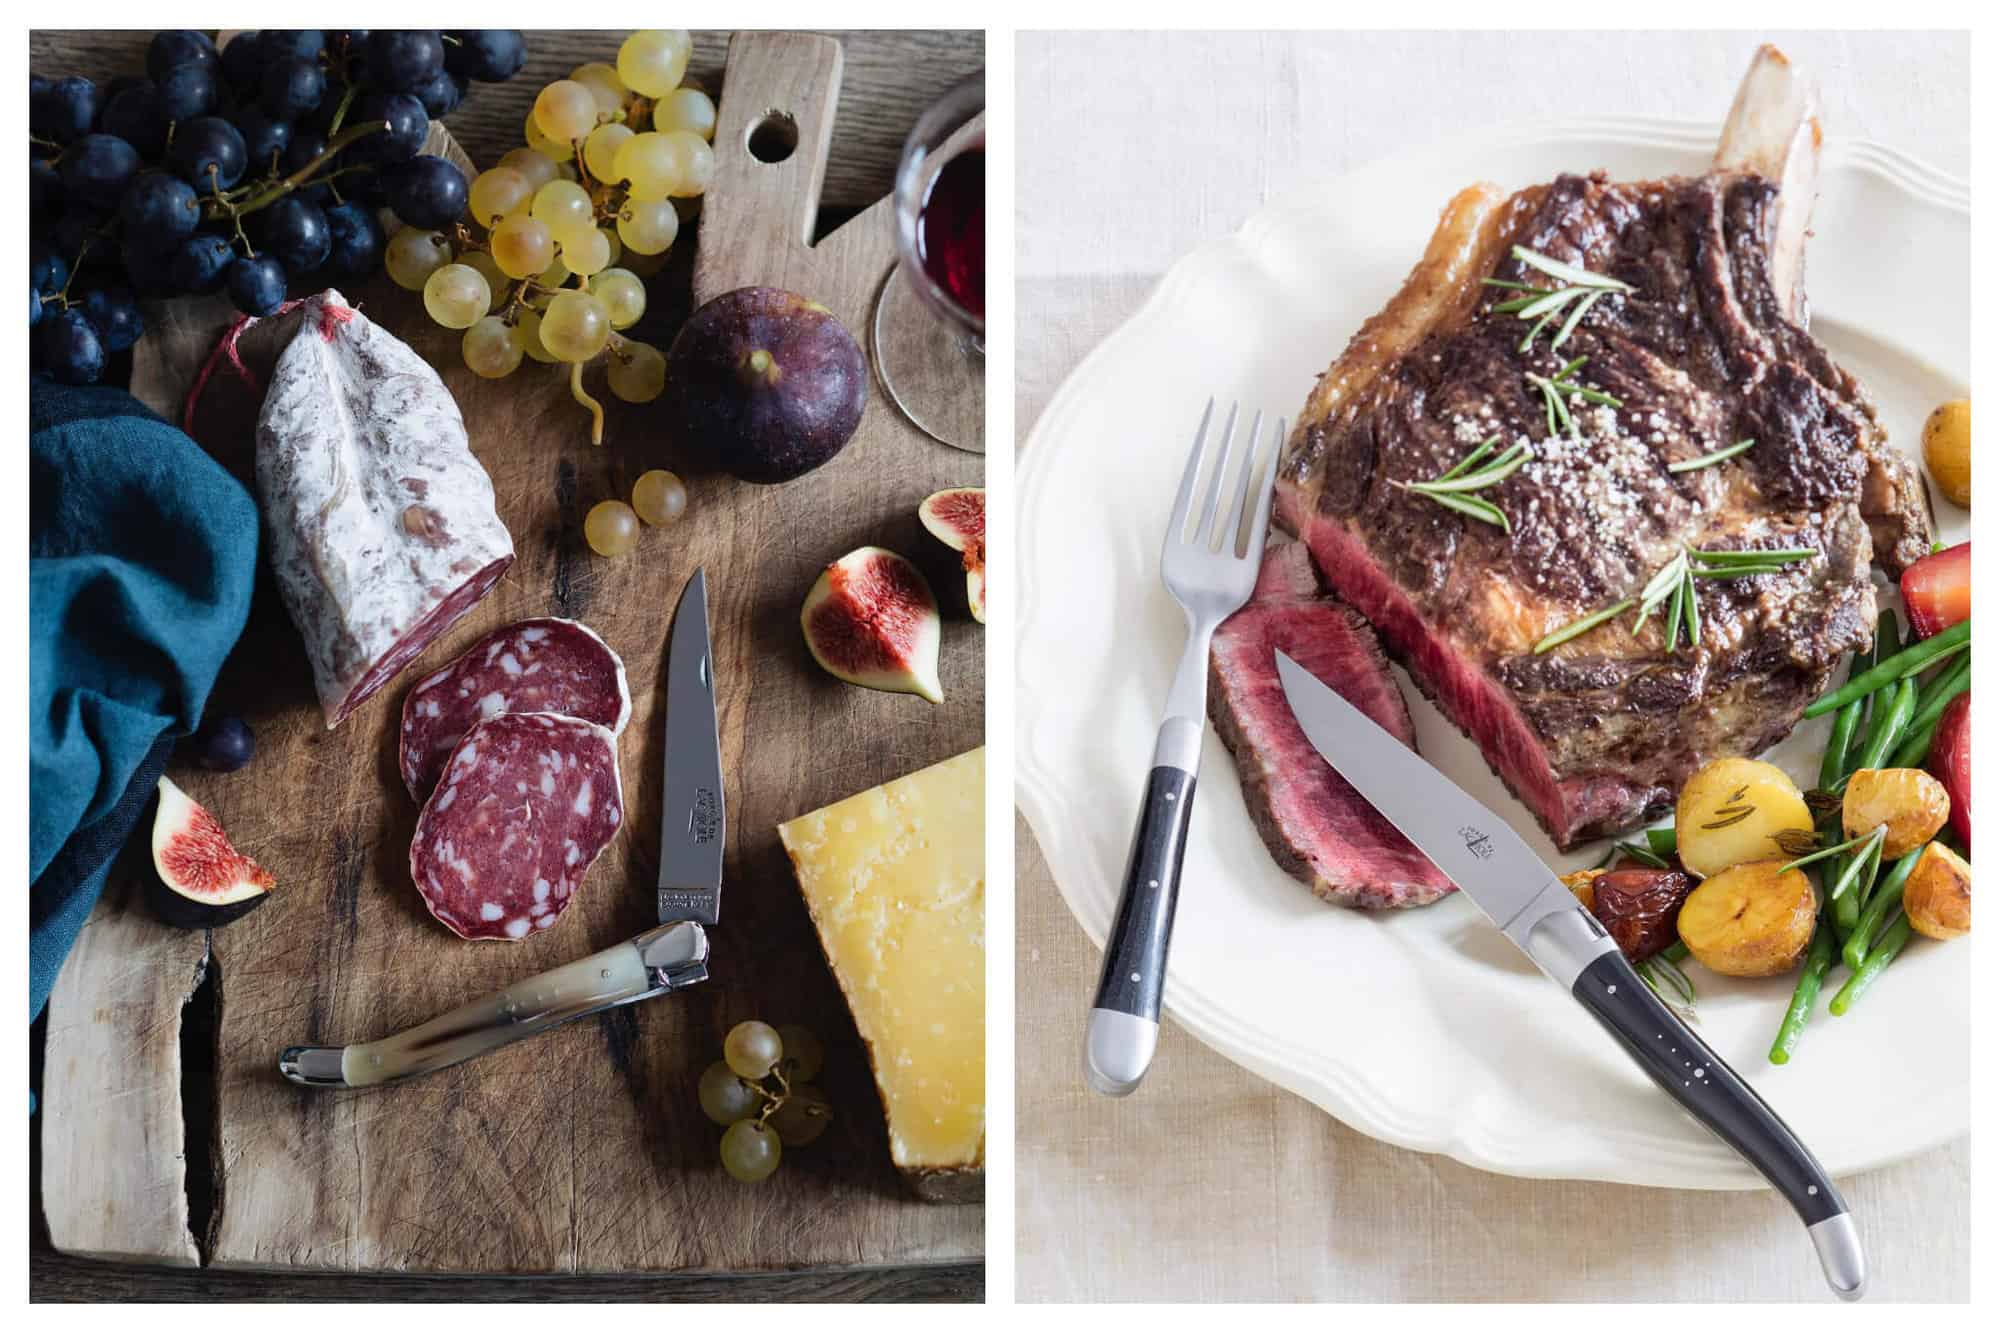 Left: a wooden chopping board with a Laguiole knife, cheese, figs, grapes, charcuterie, a glass of wine and blue napkin. Right: a plate with Laguiole cutlery, a roast piece of rare meat and vegetables on a white plate.